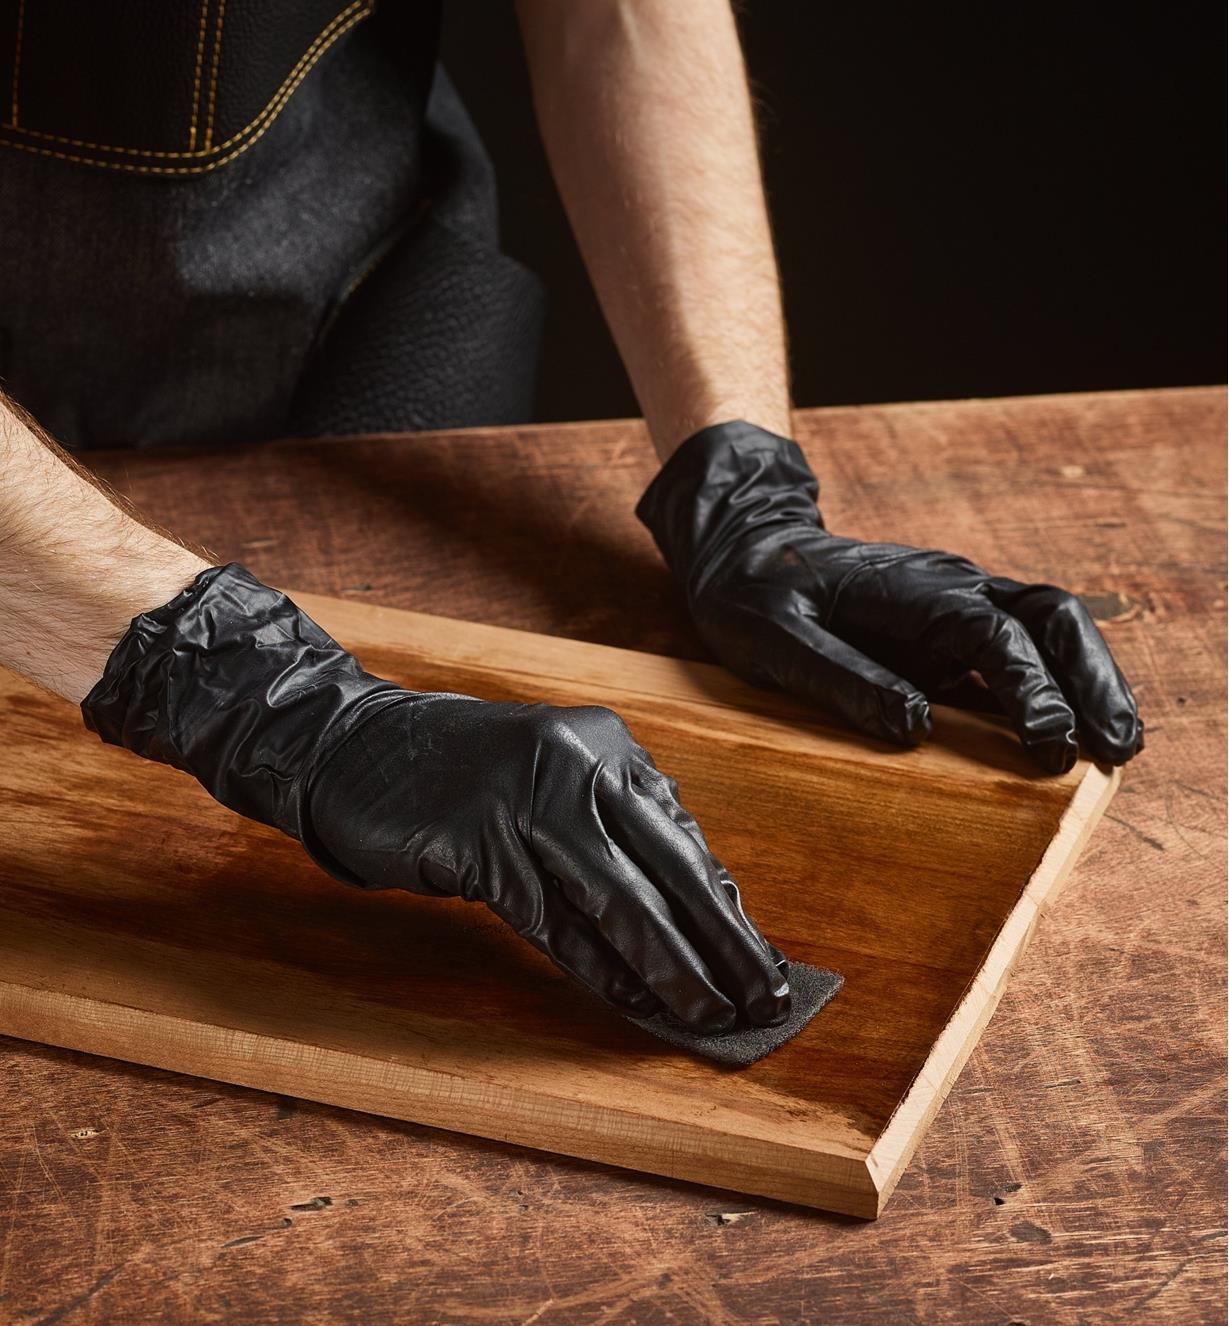 A woodworker wearing gloves uses a pad to apply Rubio Monocoat 2C to a plank of wood